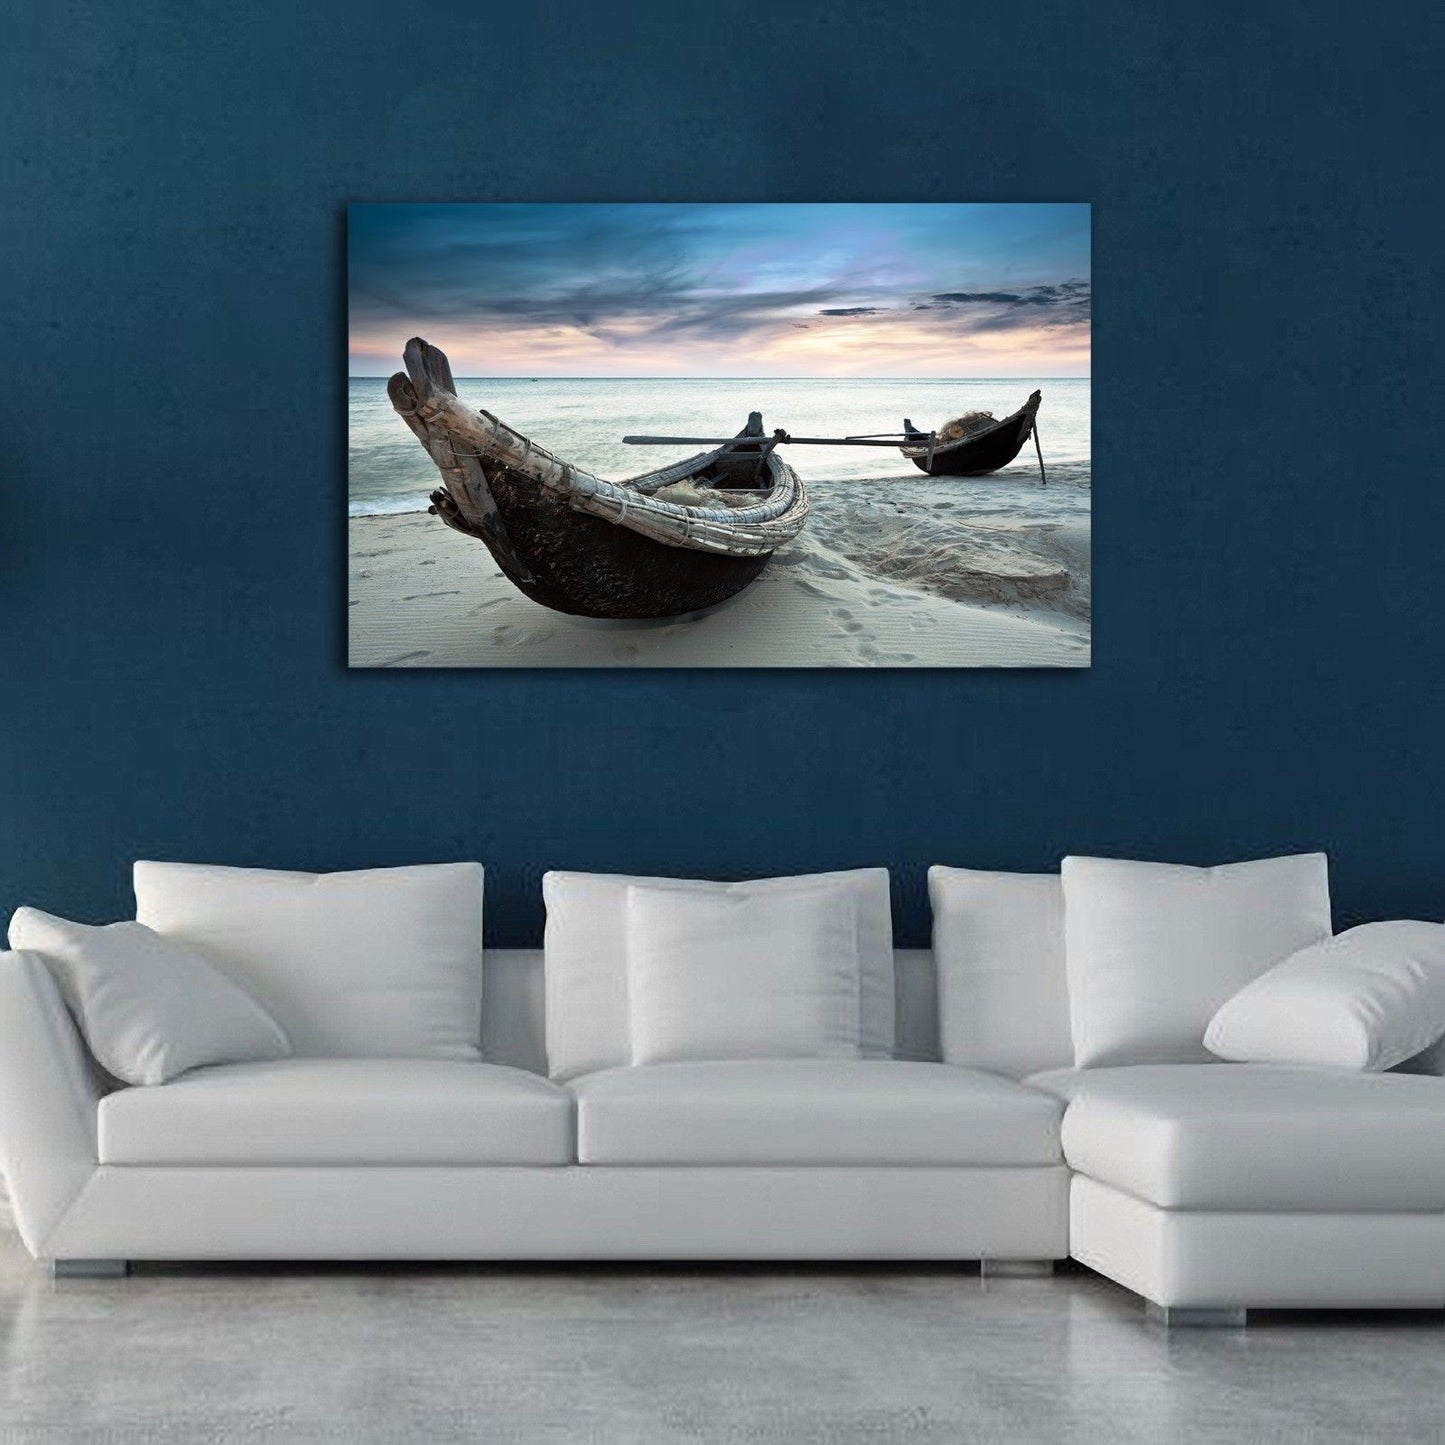 Stretched Framed canvas prints print seascape cloudy boat time-lapse wall art